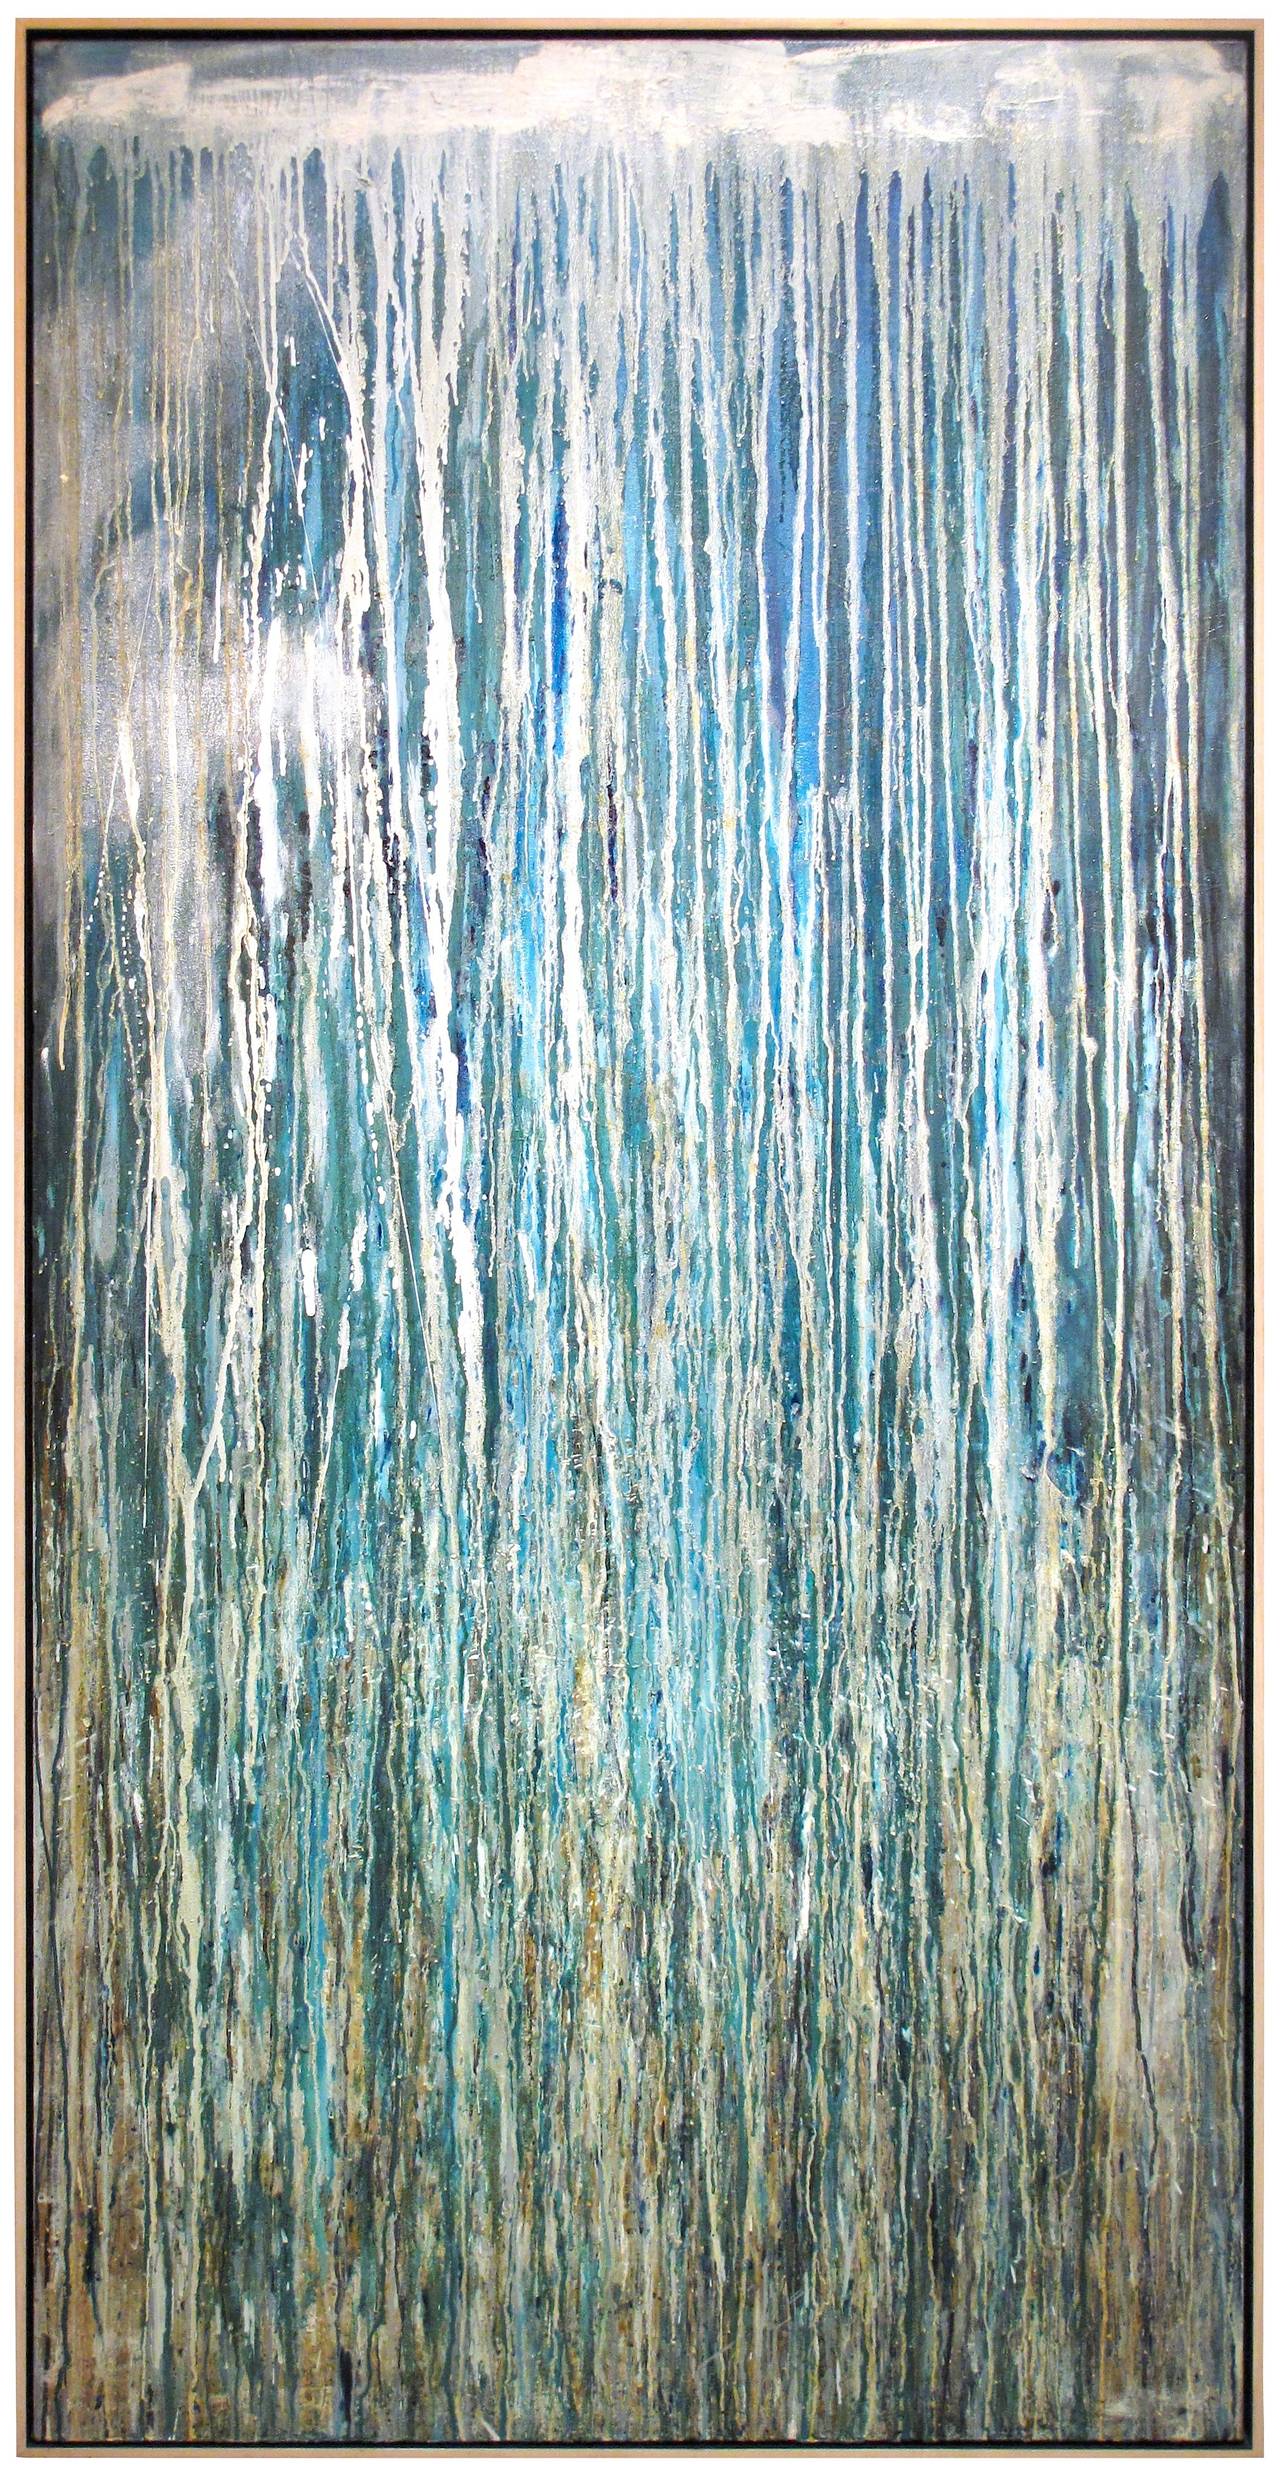 <i>Waterfall</i>, 1988, by Pat Steir, offered by